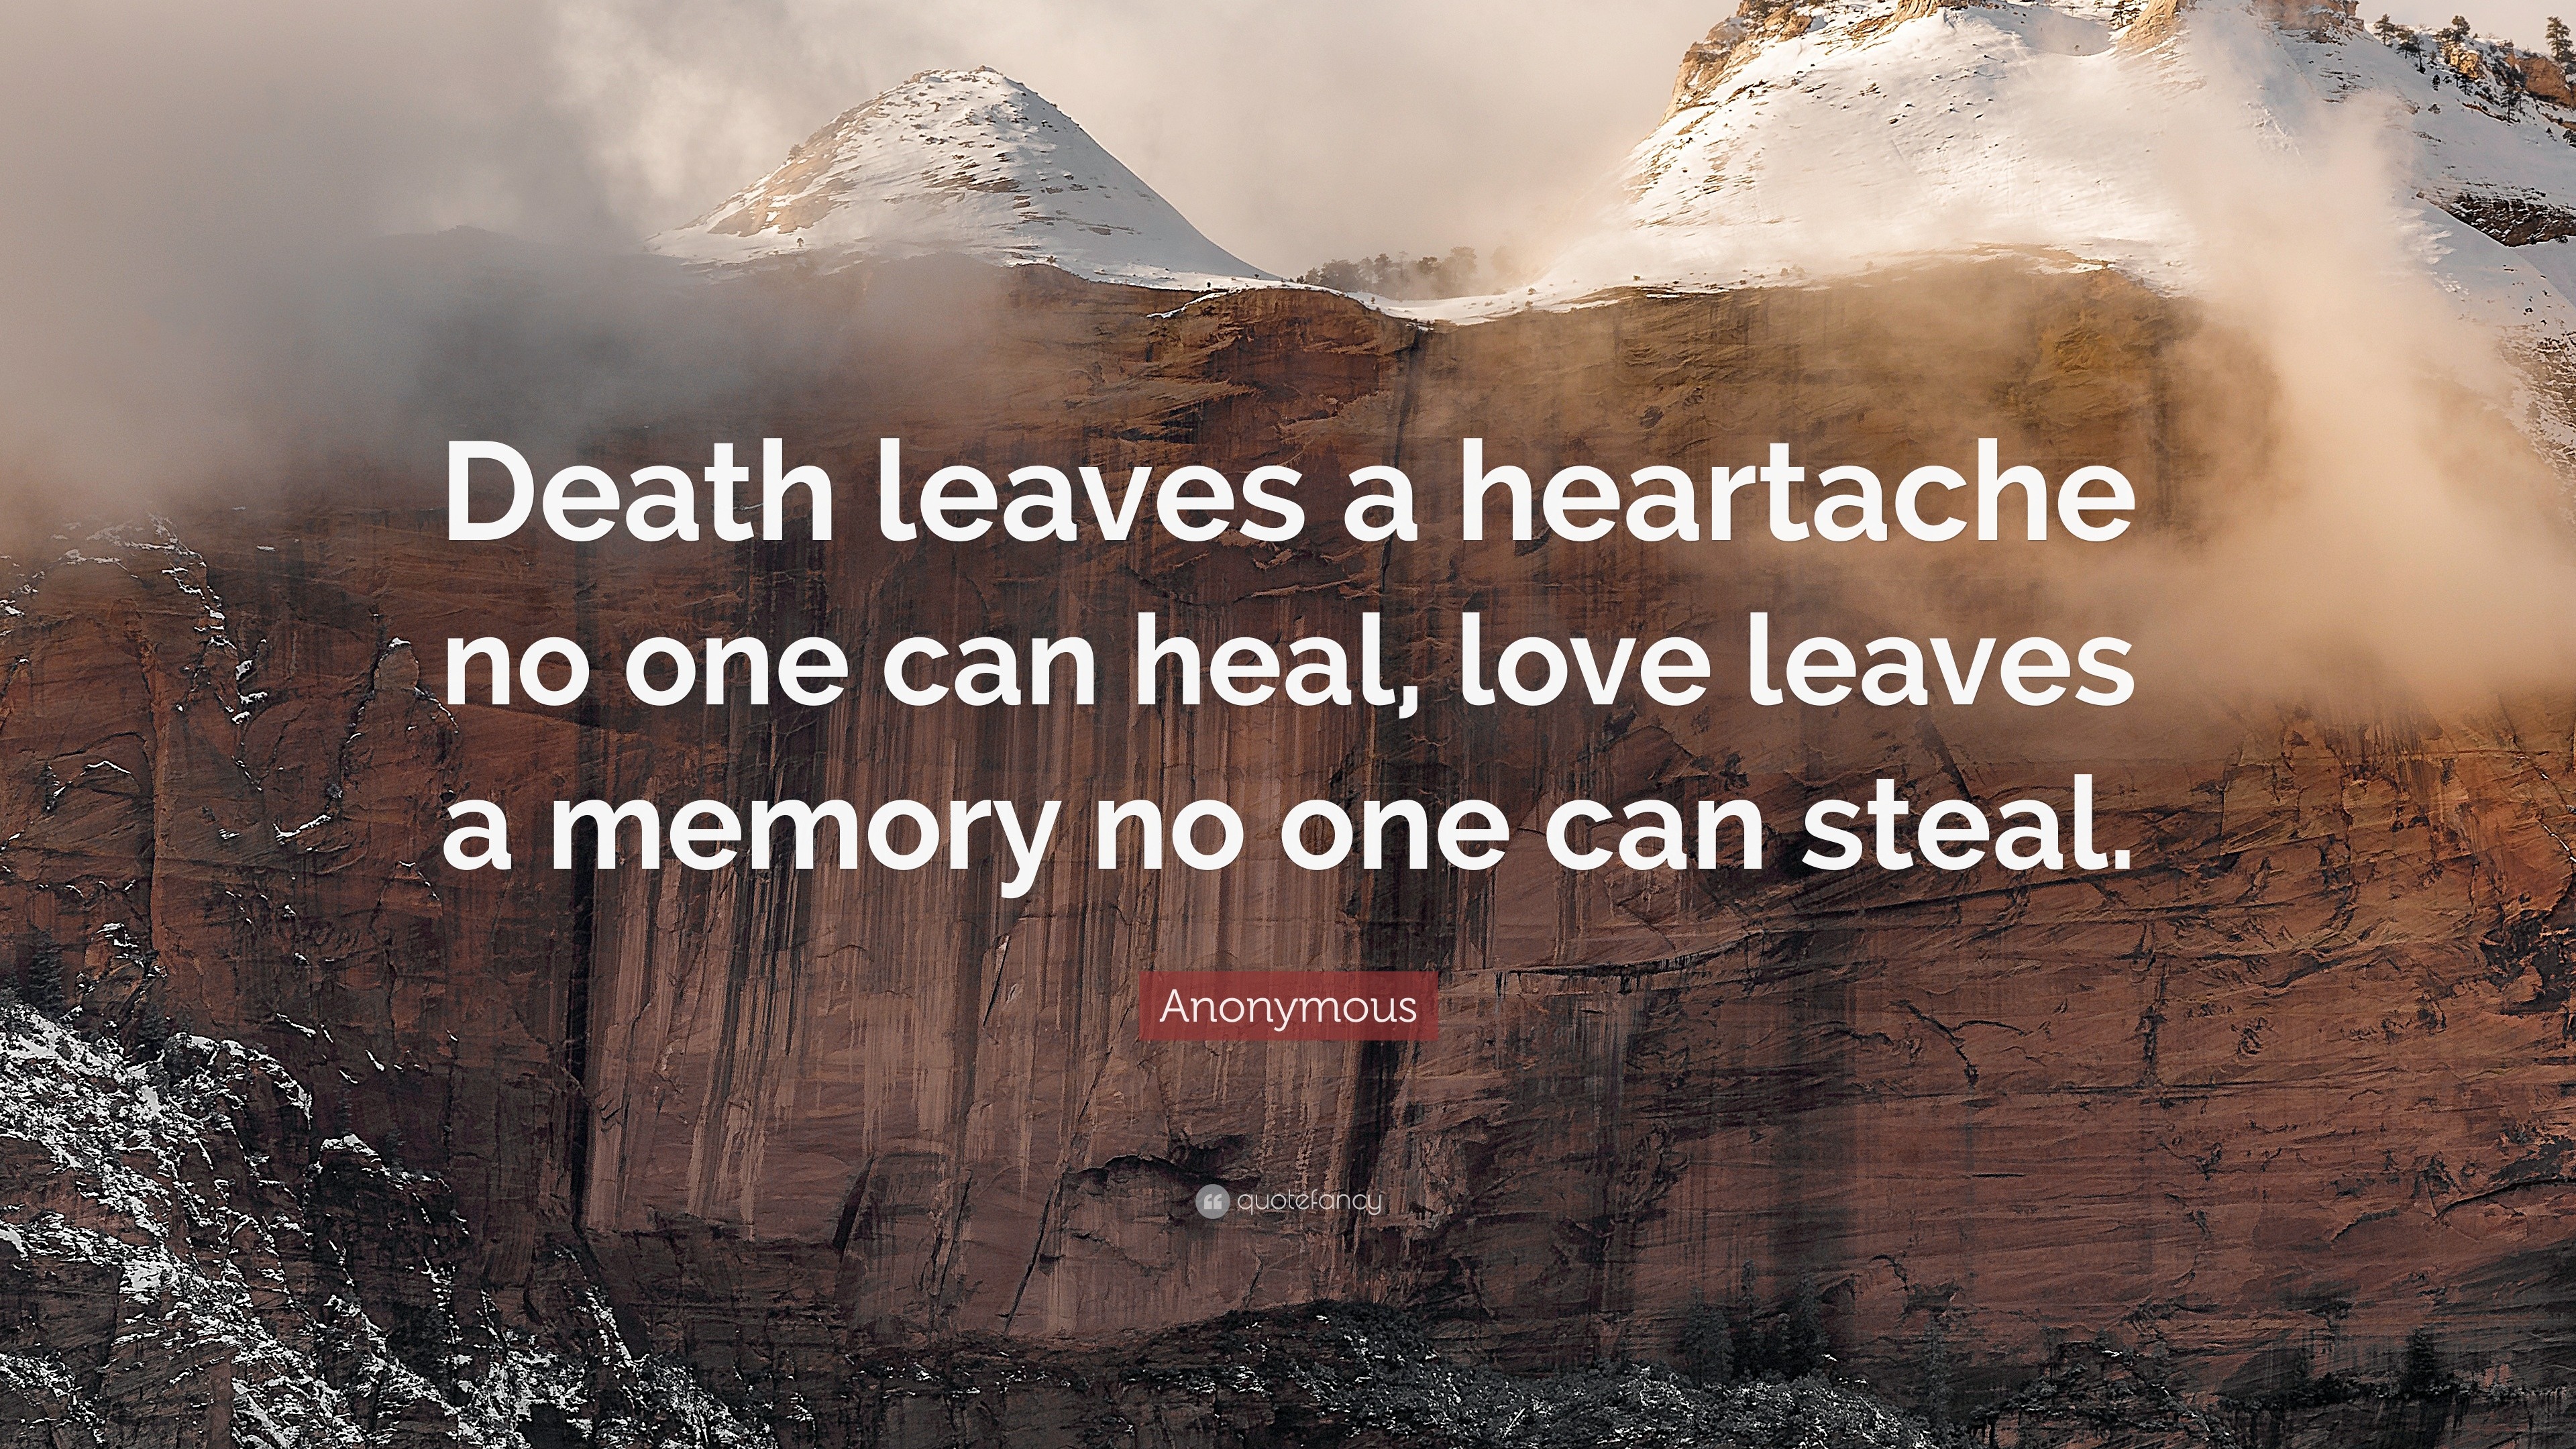 Anonymous Quote “Death leaves a heartache no one can heal love leaves a